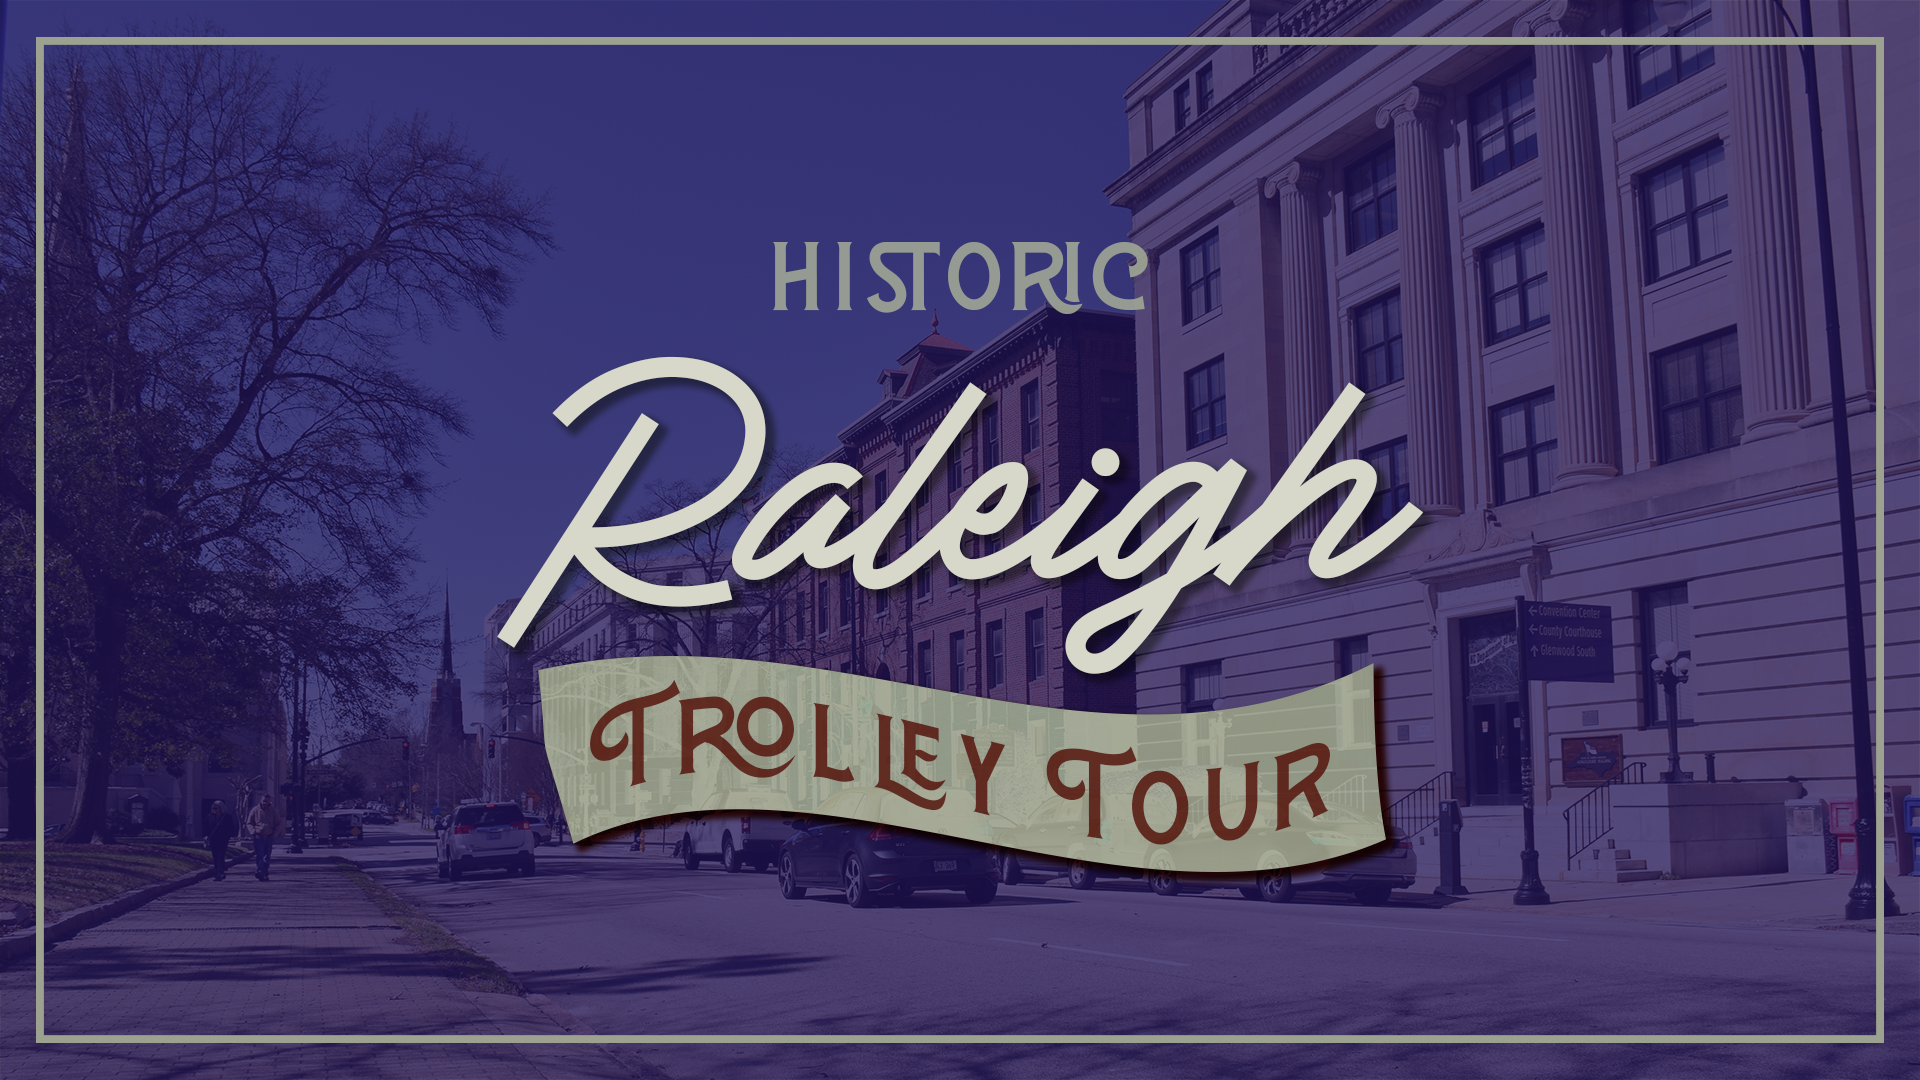 Historic Raleigh Trolley Tour